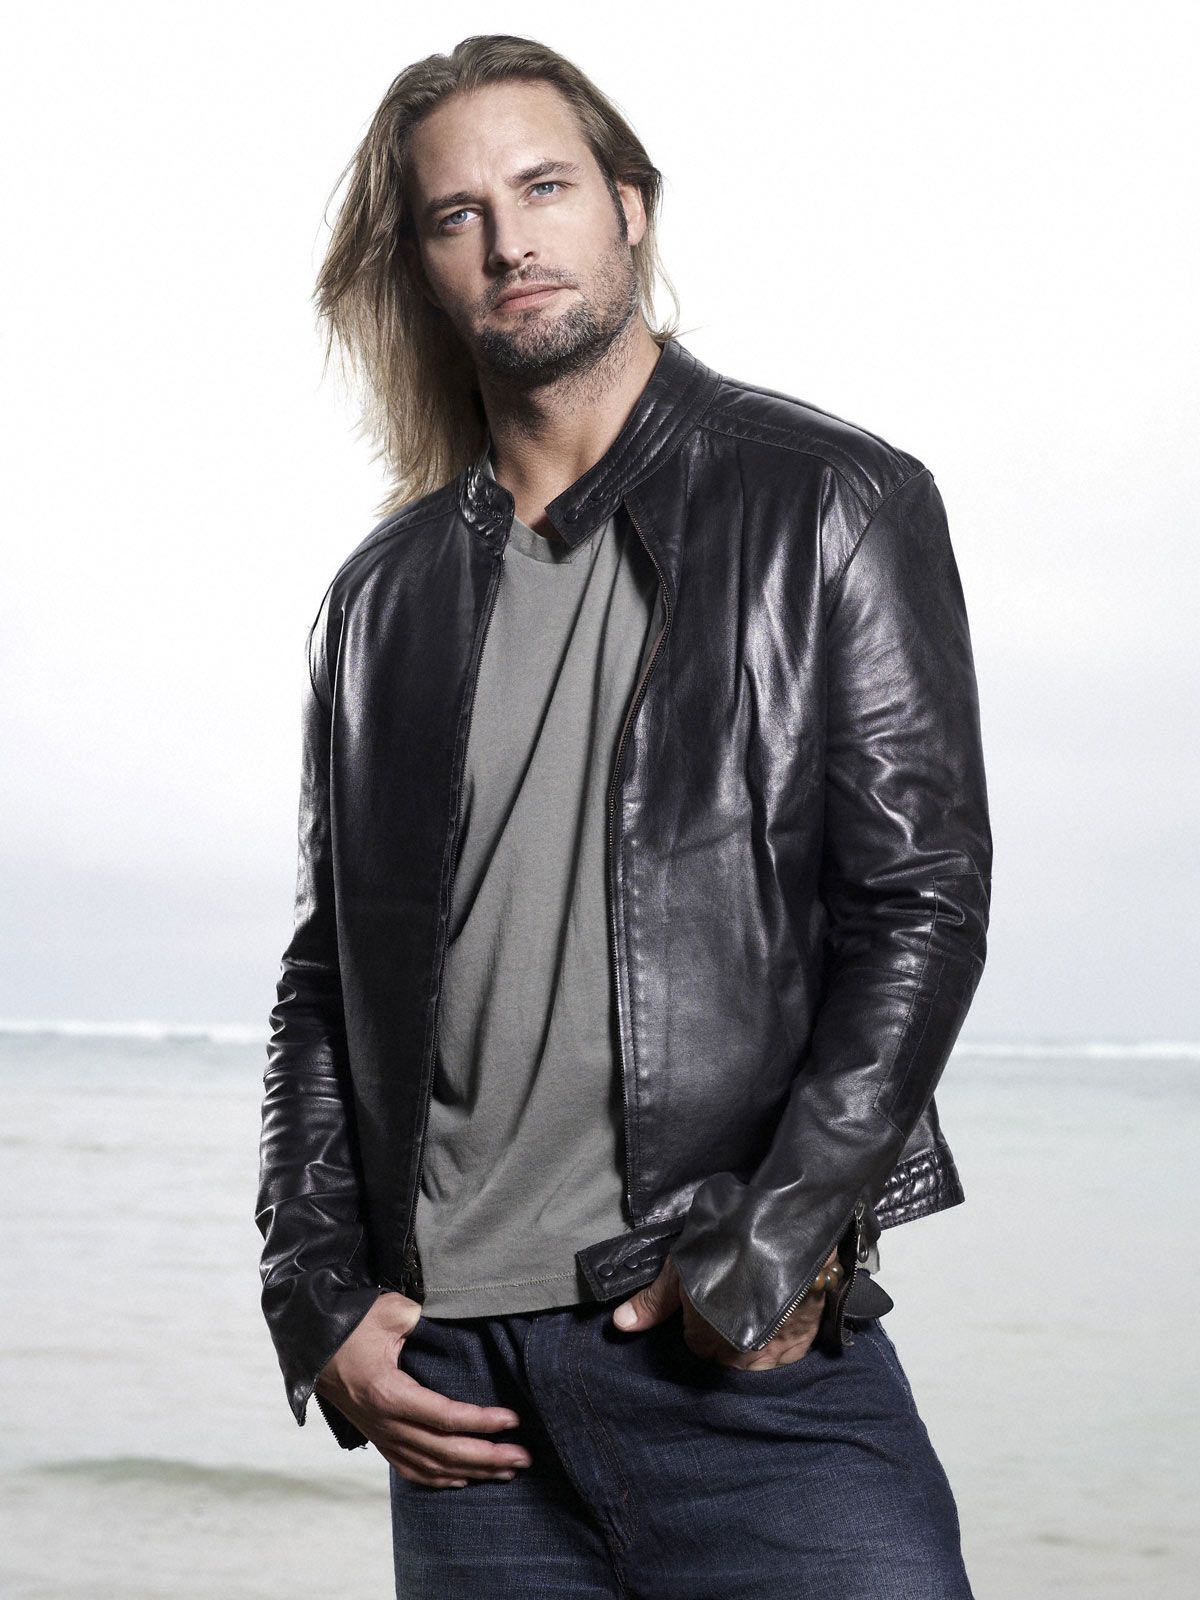 Lost, Josh Holloway as Sawyer James Ford